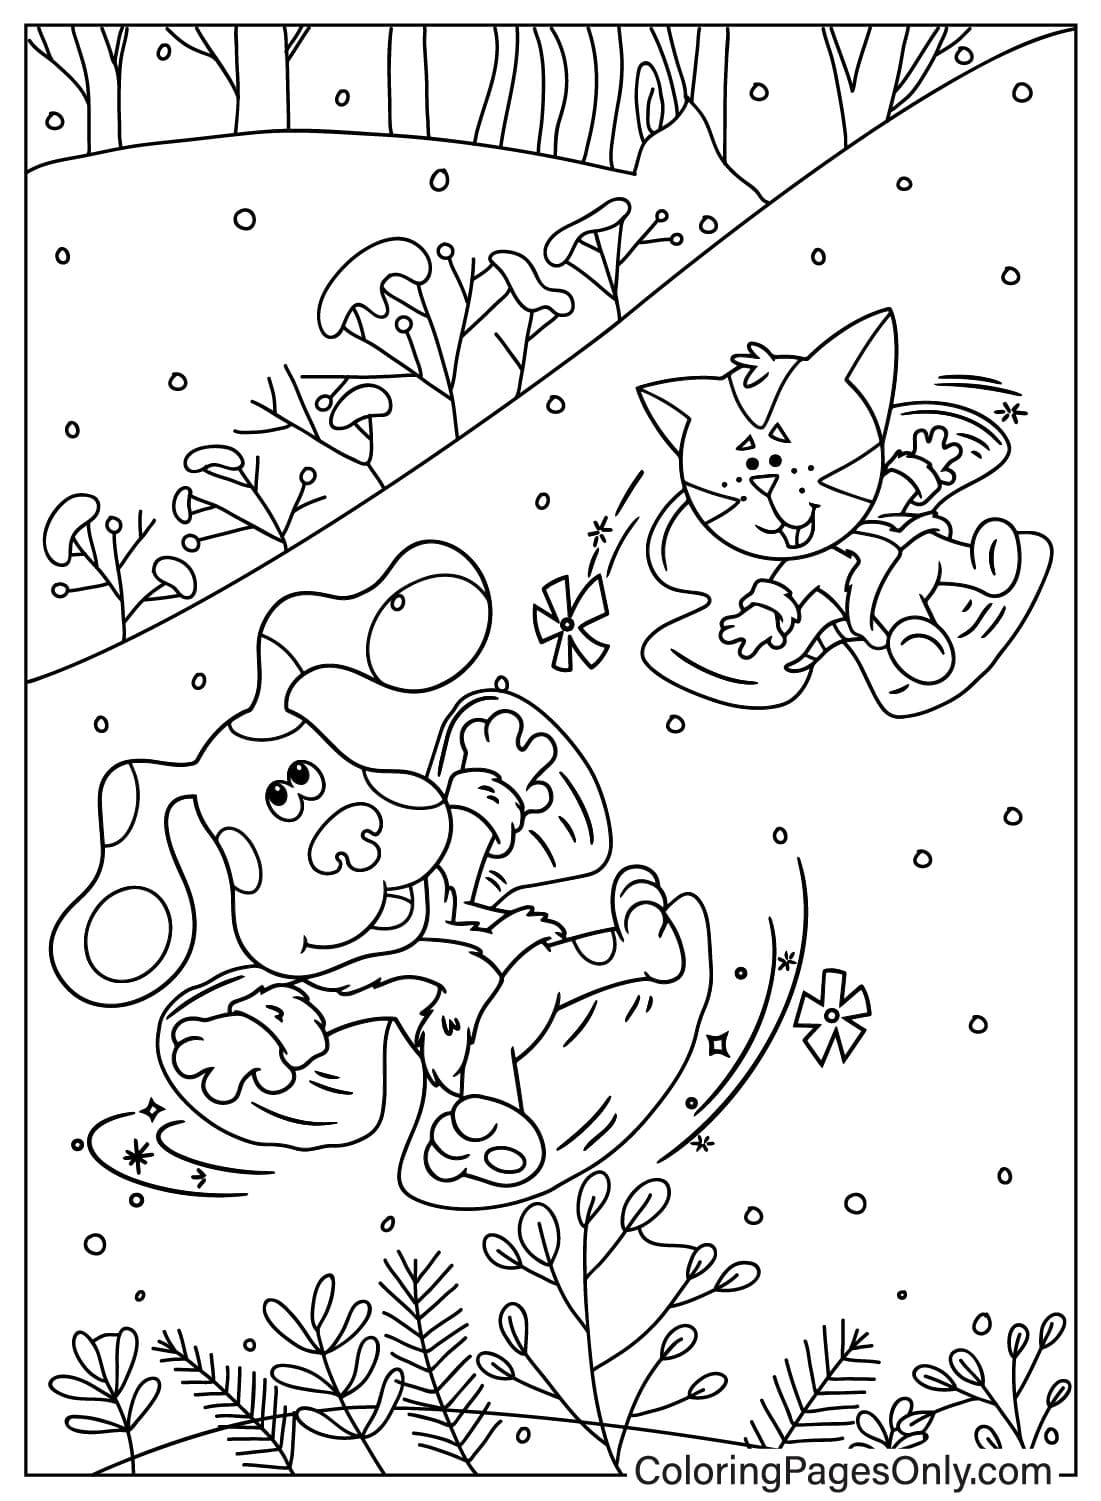 Blue and Periwinkle Coloring Page Free